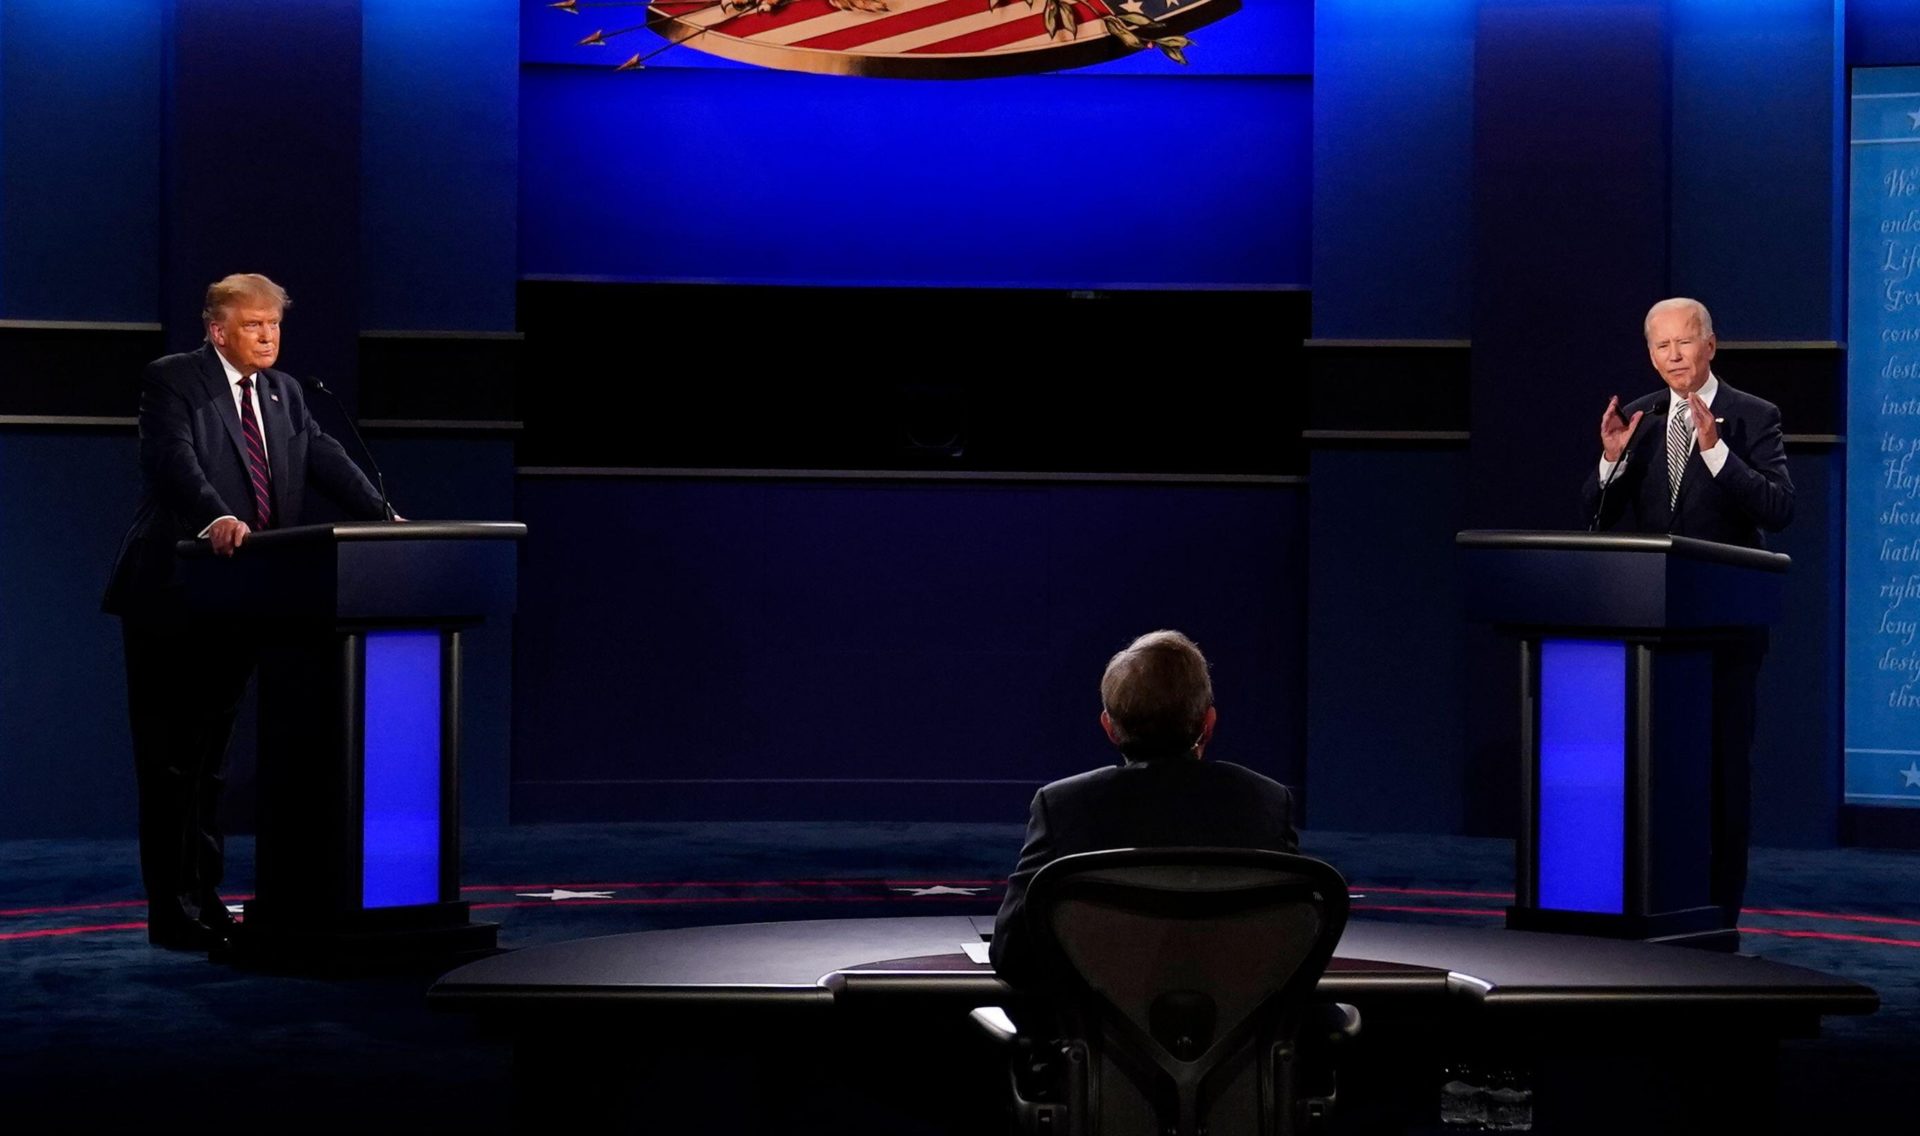 Donald Trump, left, and Joe Biden, right, during a presidential debate in Cleveland, 30-9-20.